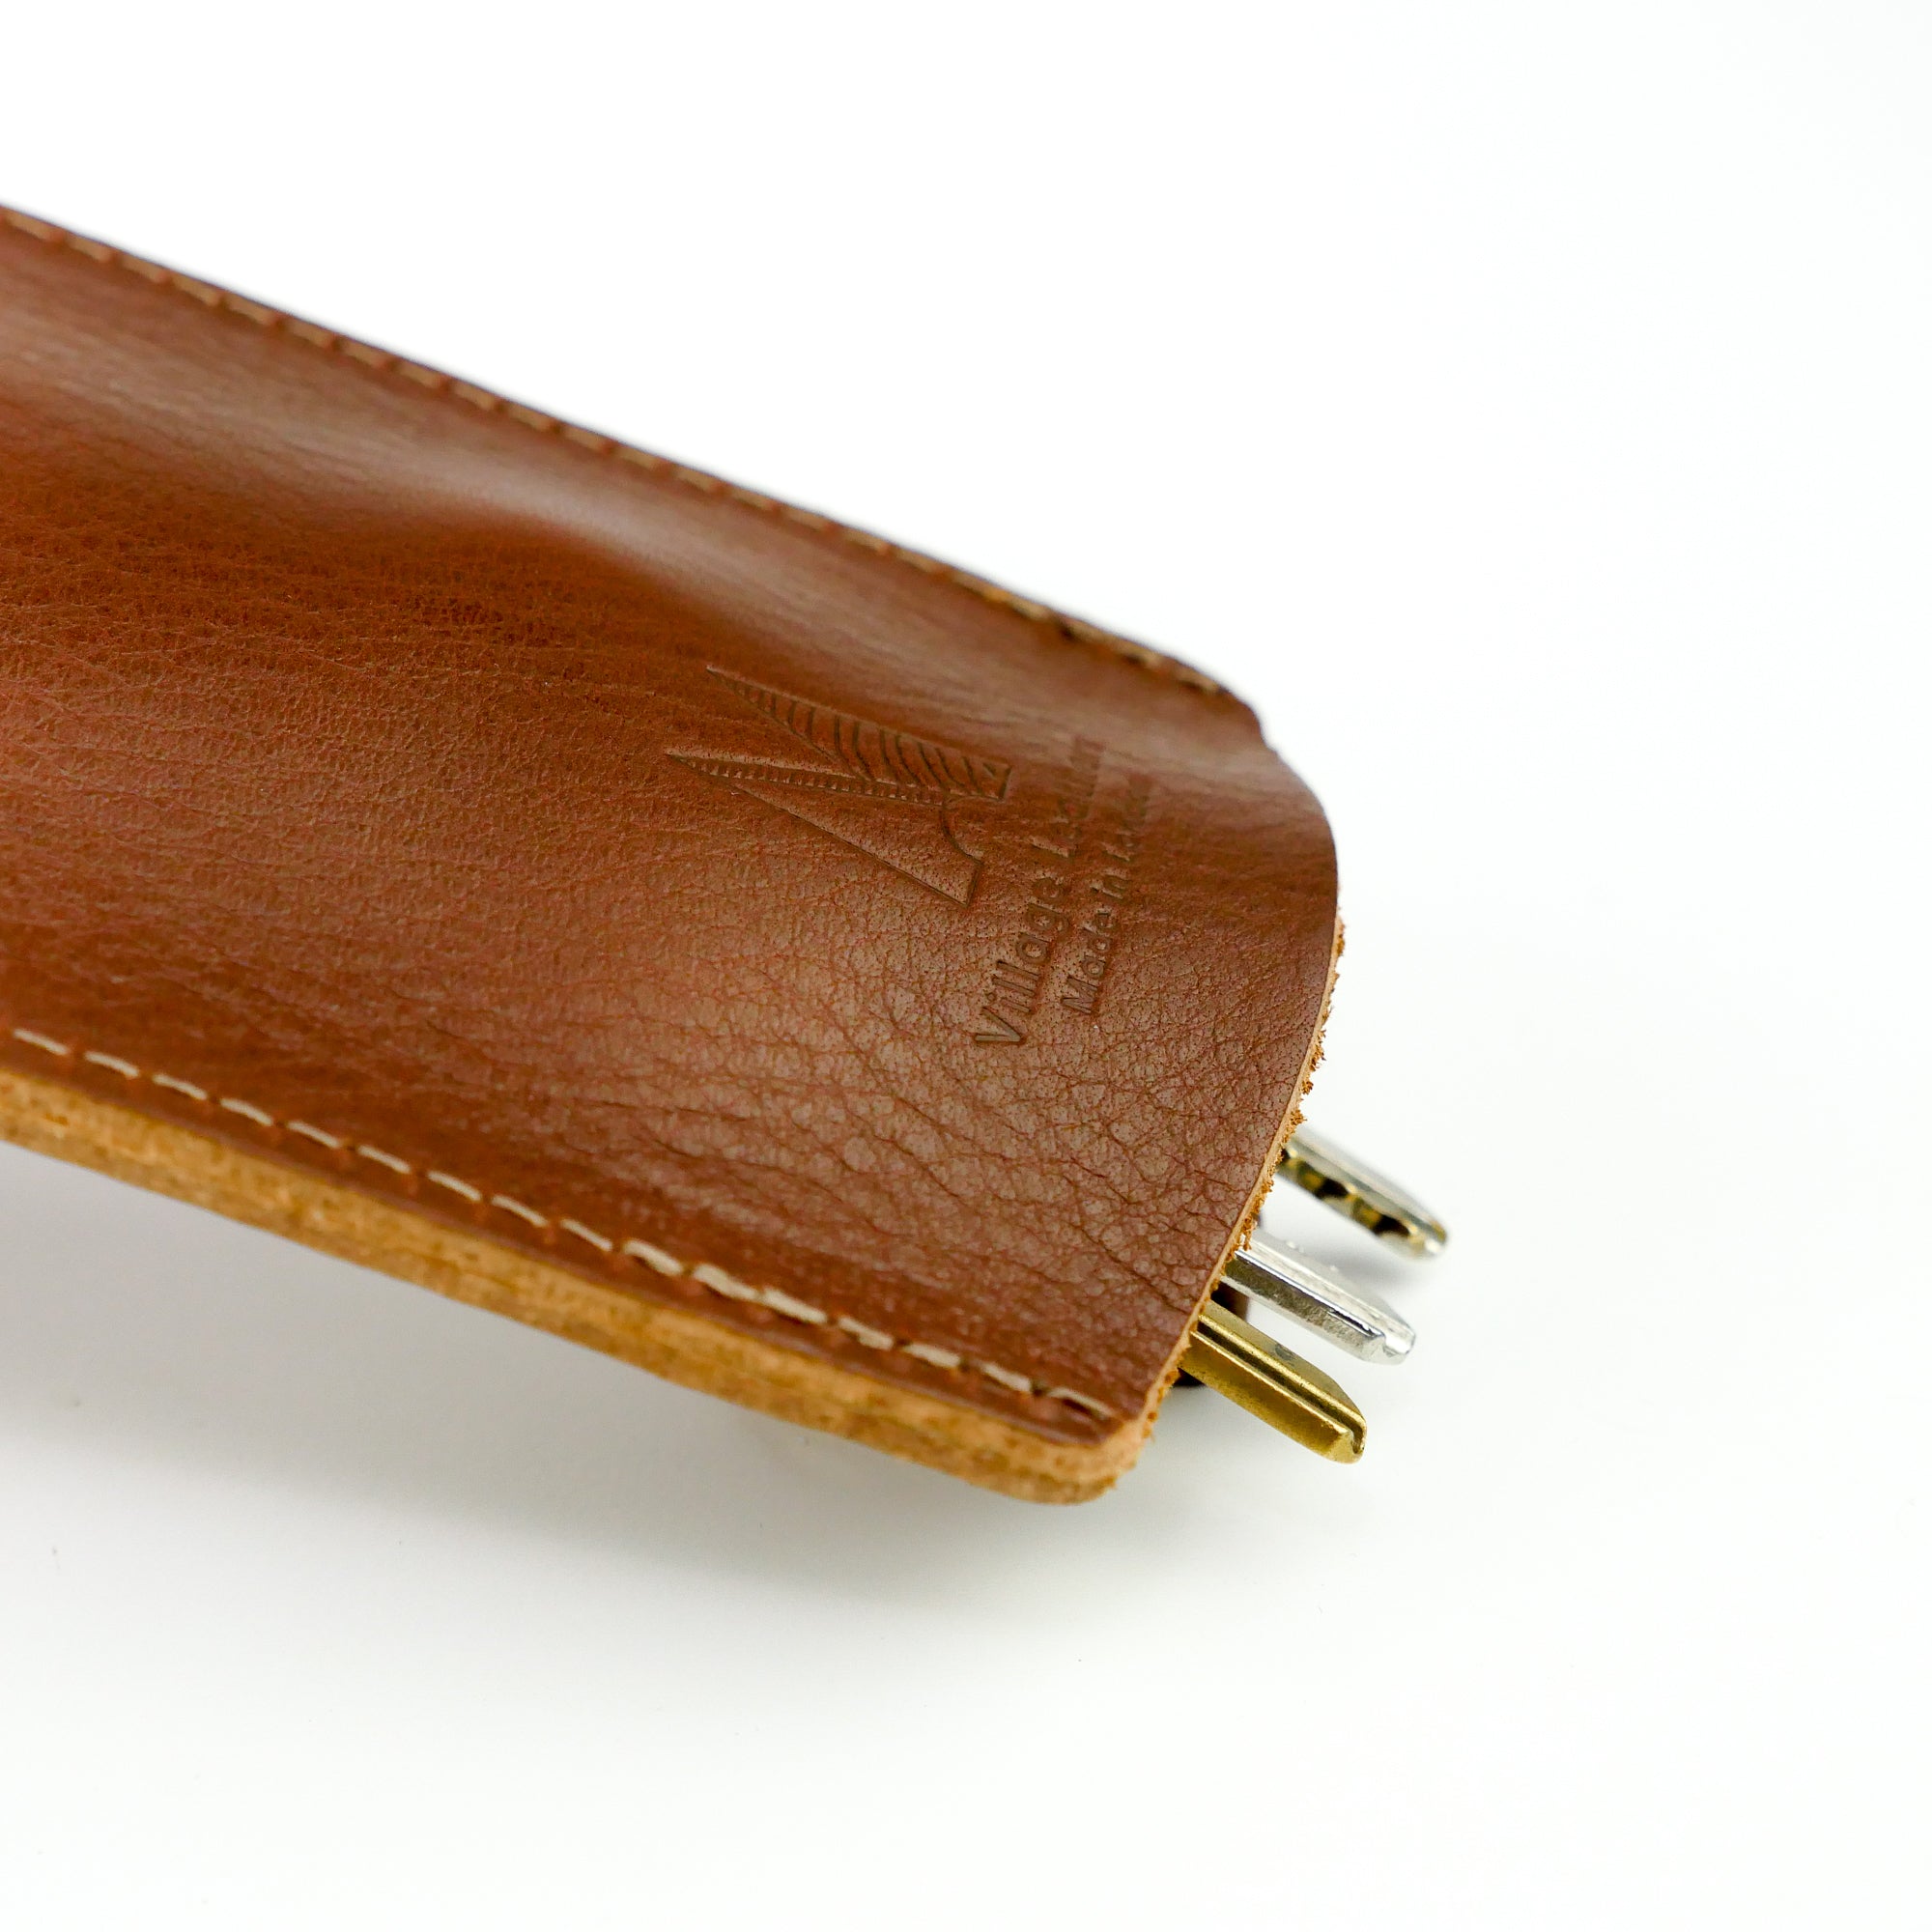 100% Genuine leather bell key case